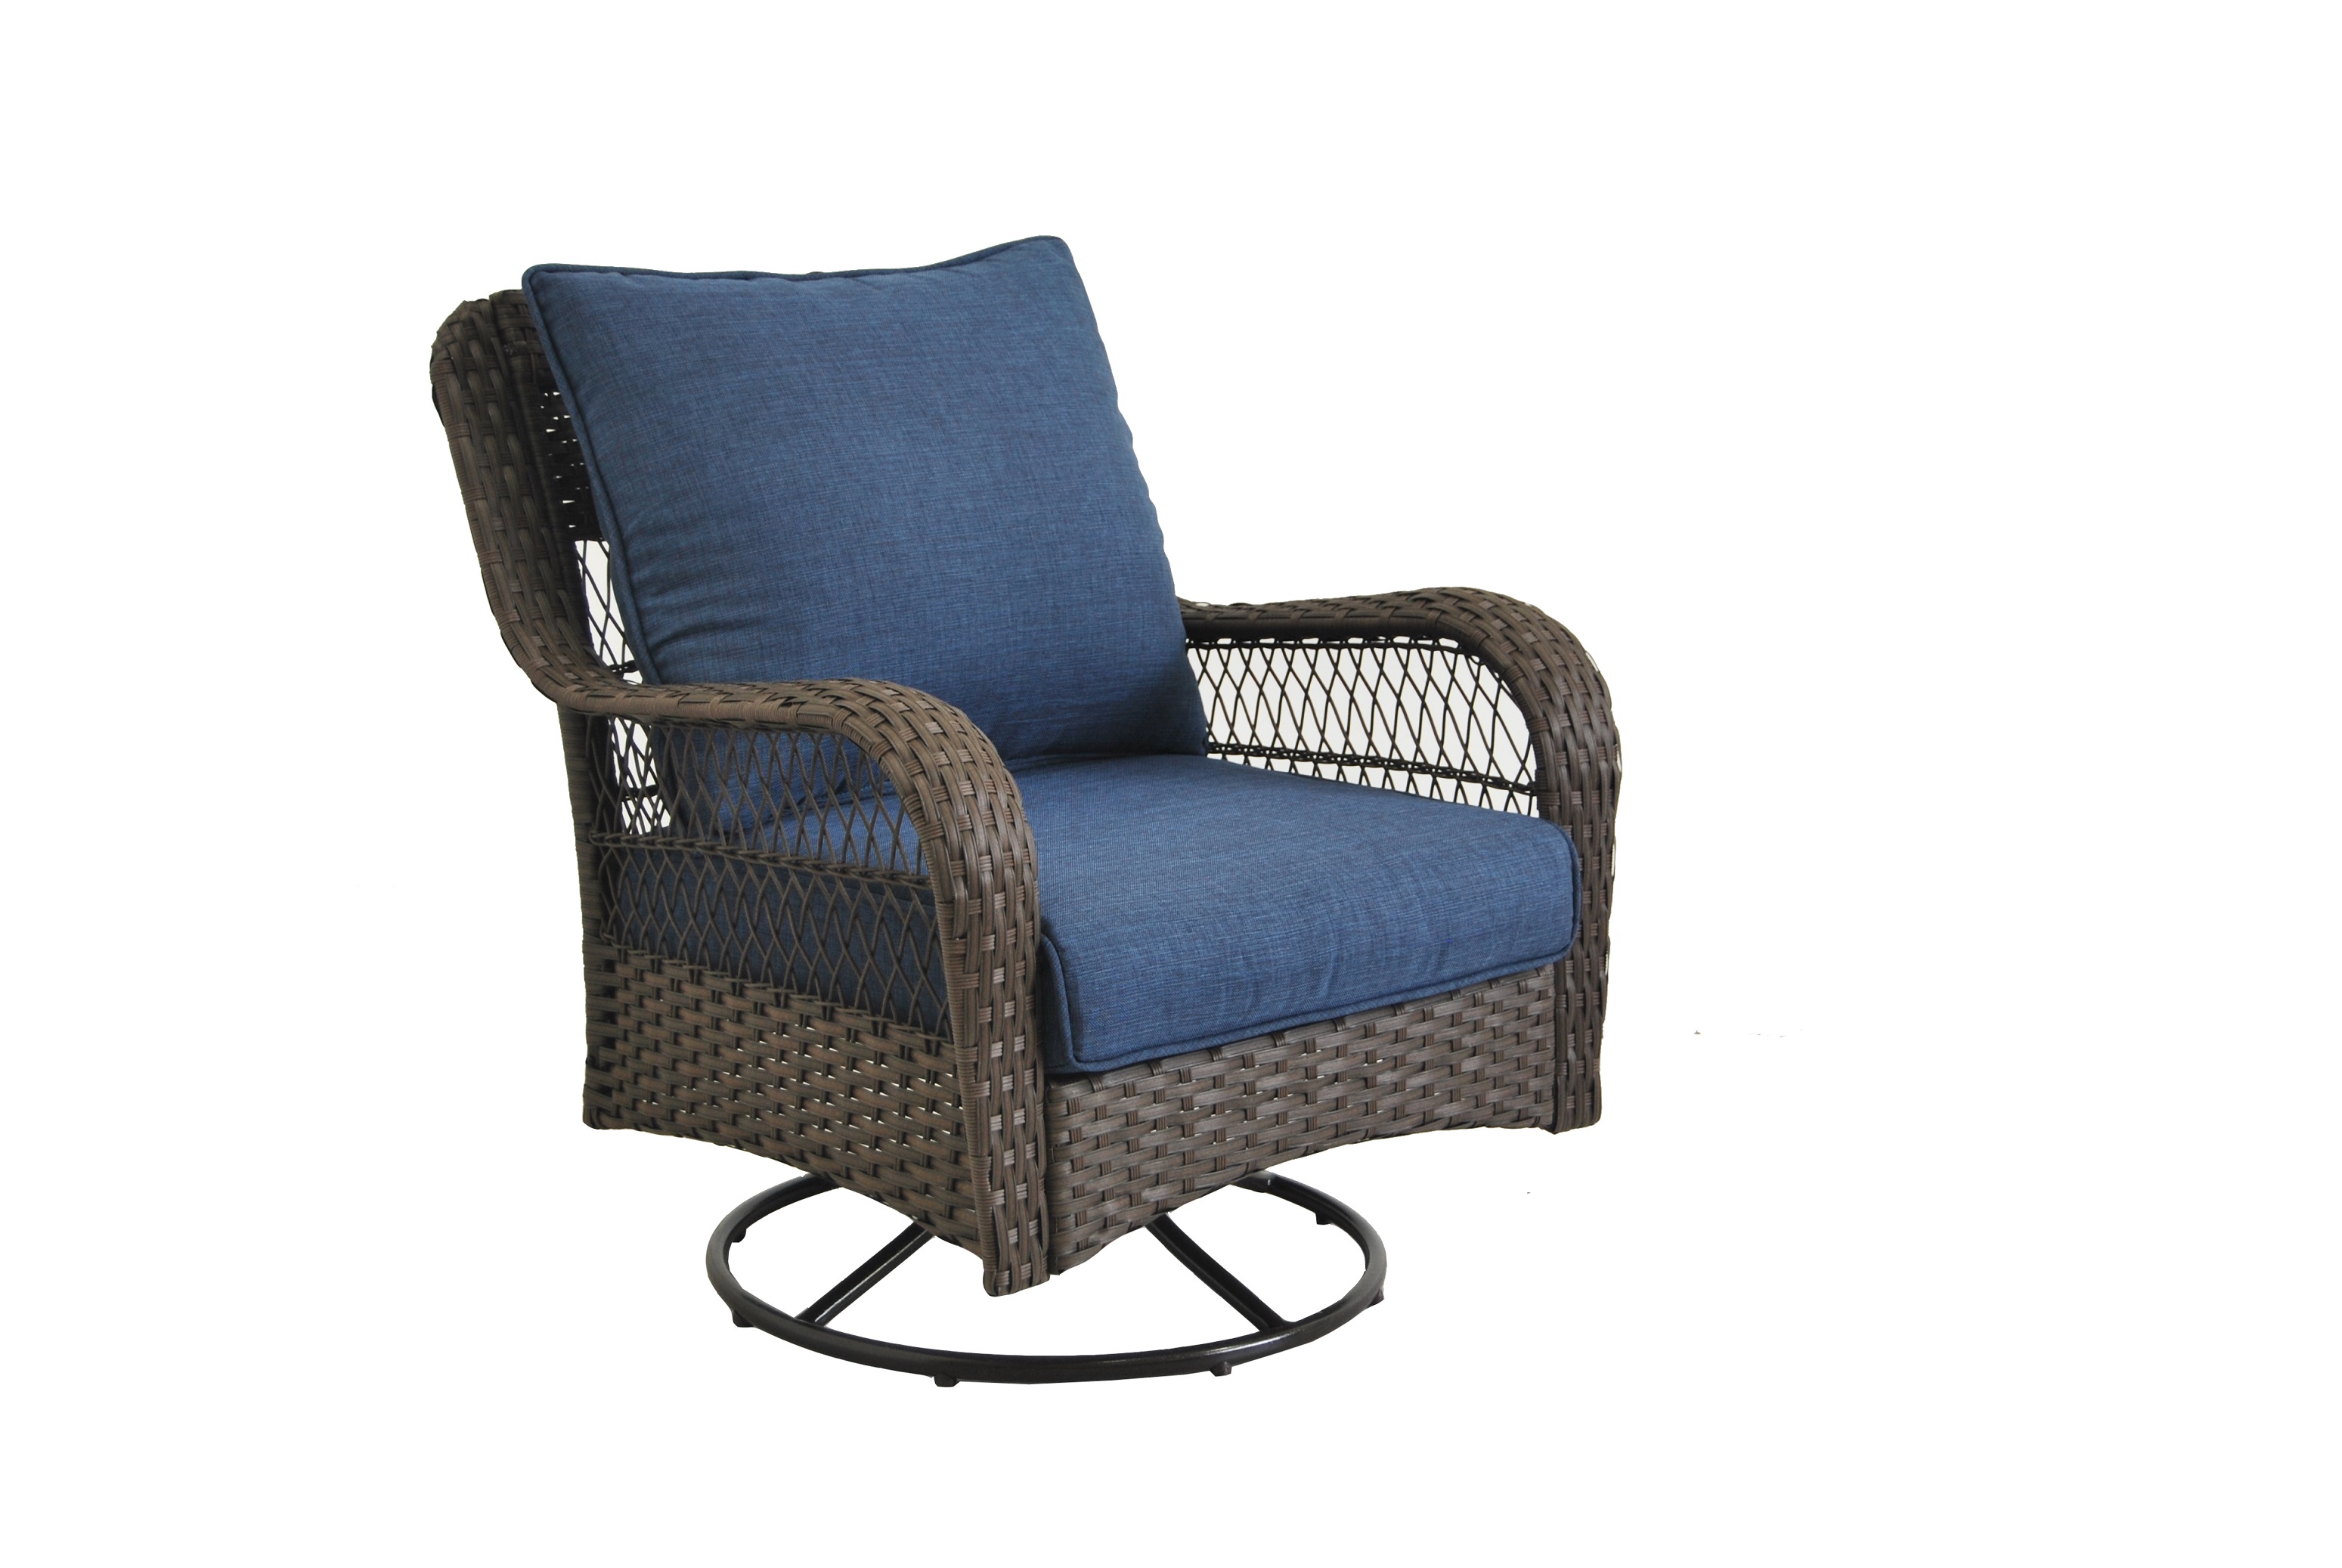 Better Homes and Gardens Outdoor Patio Furniture Colebrook 3 Piece Blue Chat set - image 2 of 7